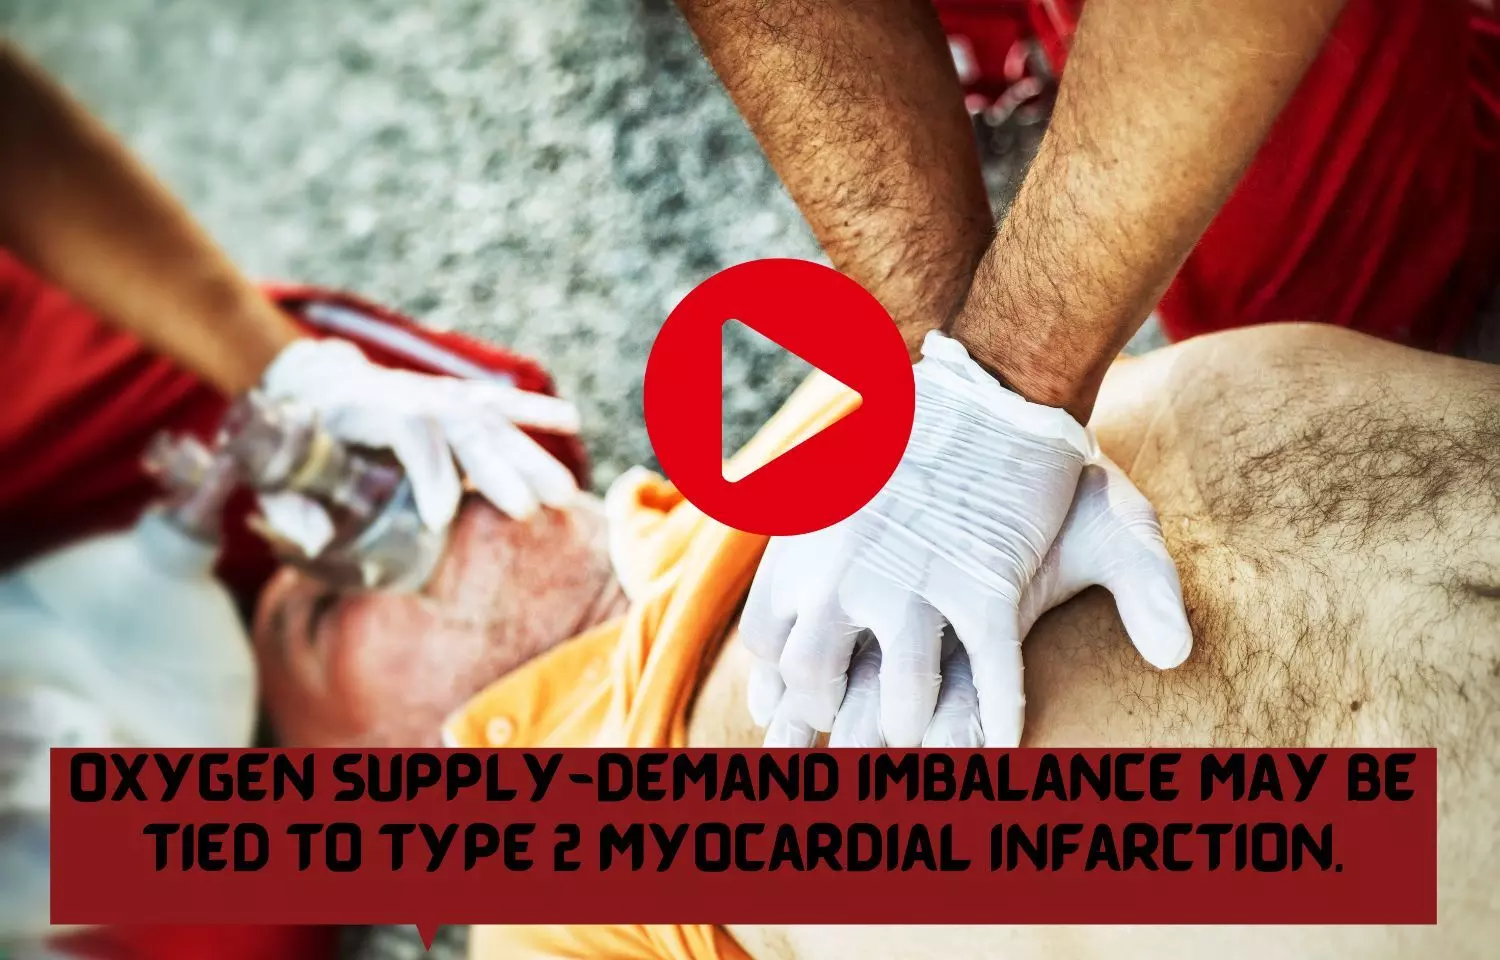 Oxygen Supply-Demand Imbalance may be tied to Type 2 Myocardial Infarction